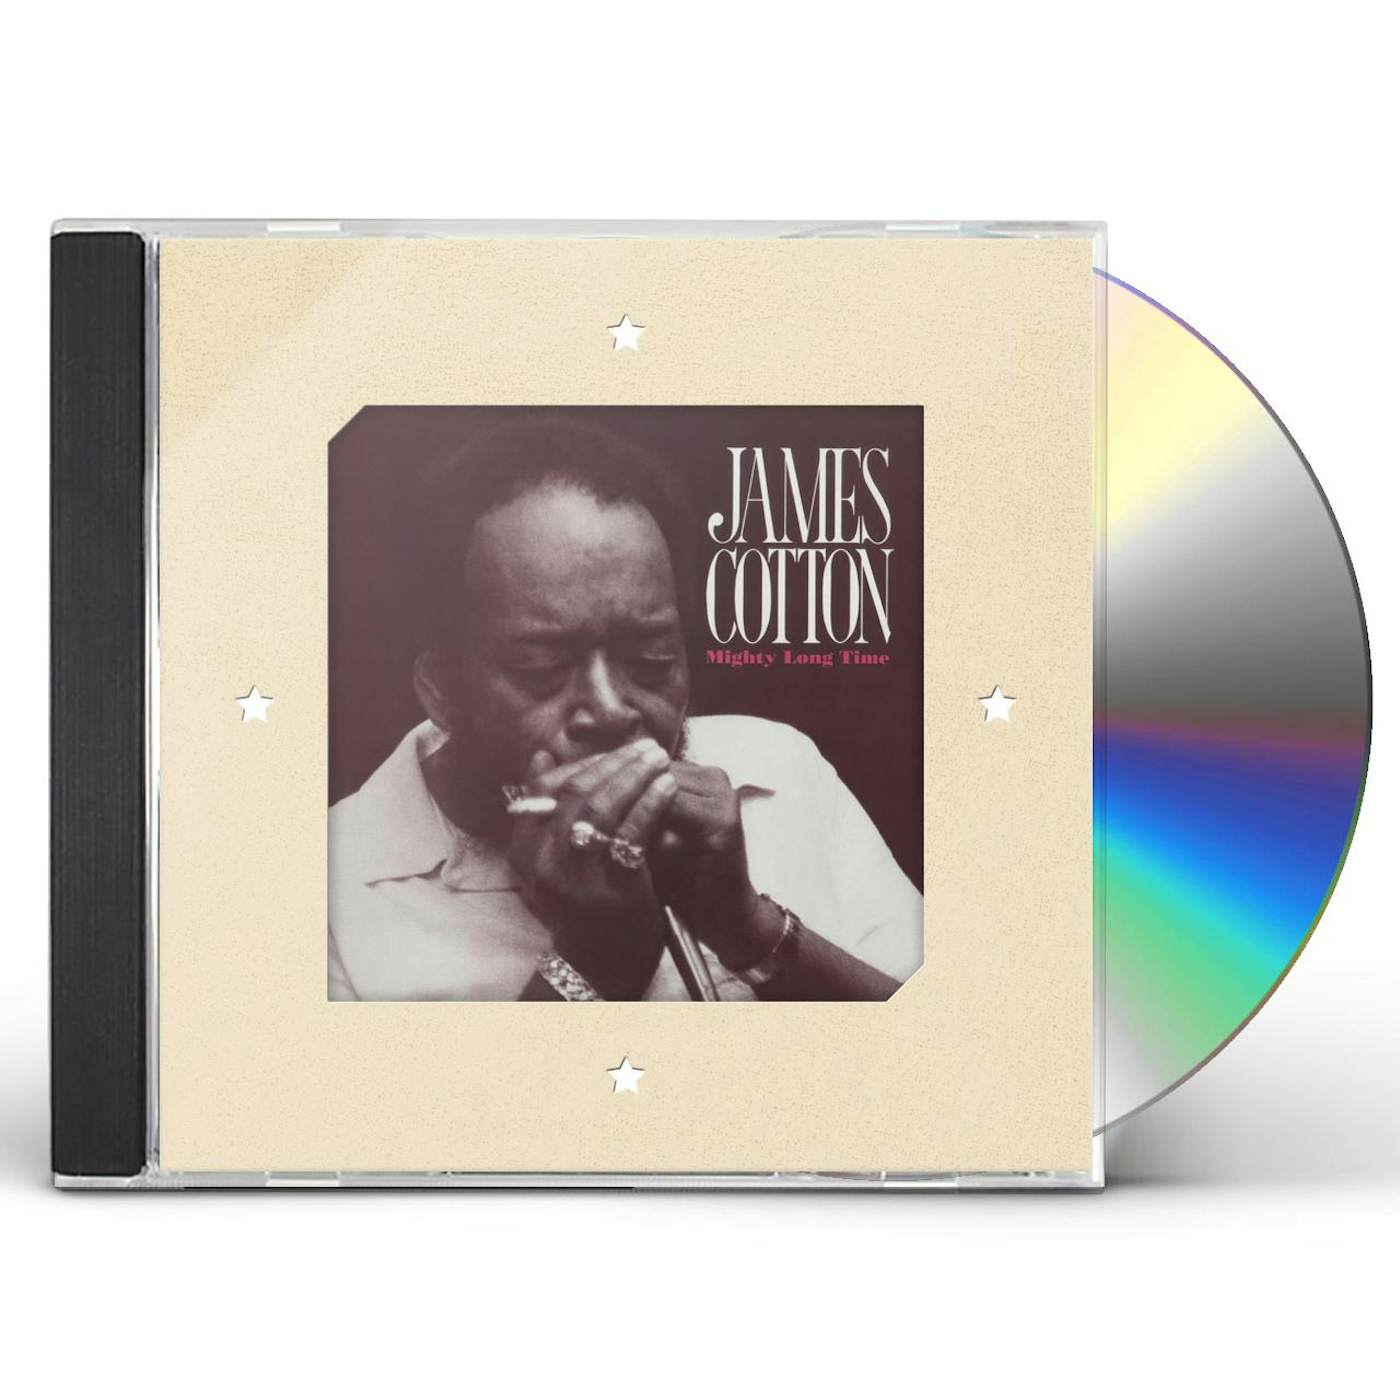 James Cotton MIGHTY LONG TIME CD